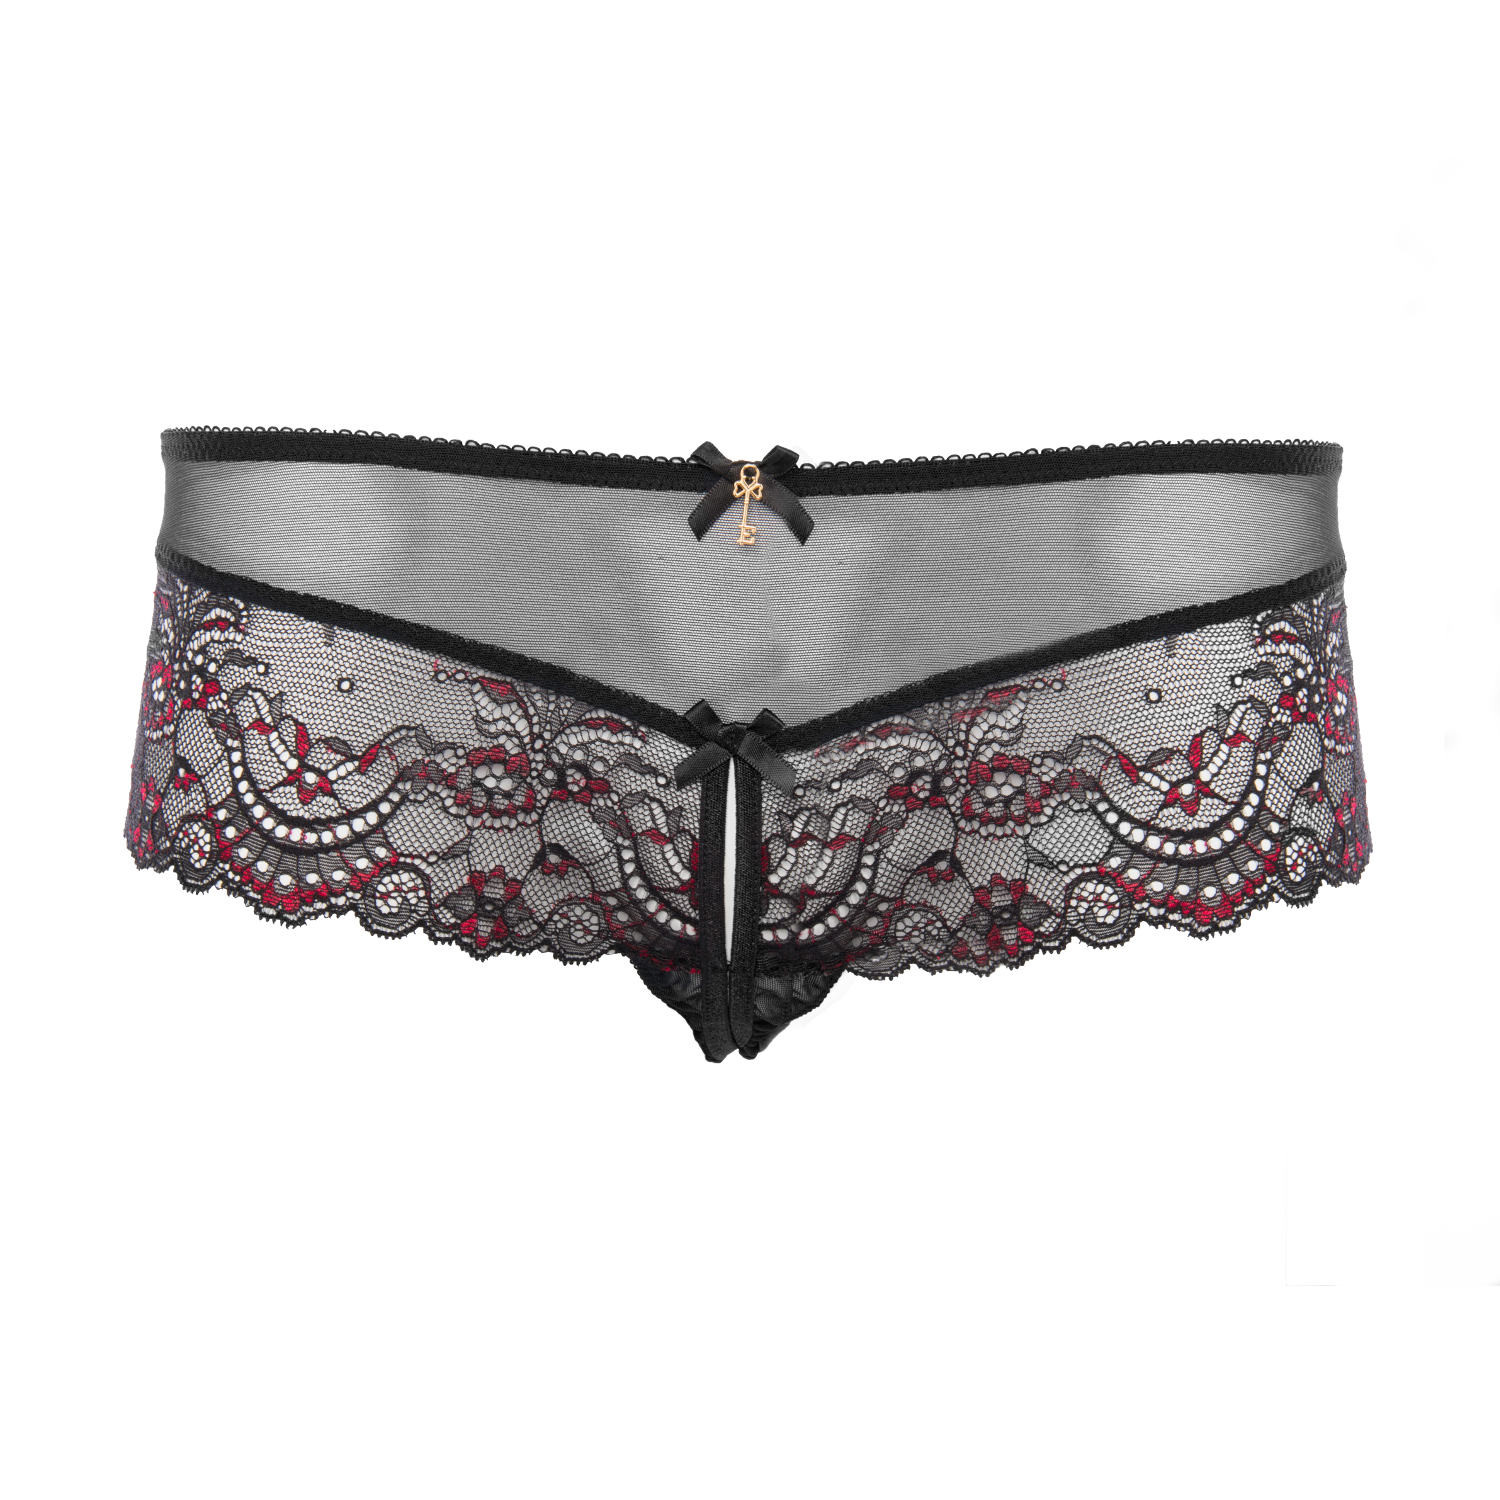 Refined panty ouvert by Escora